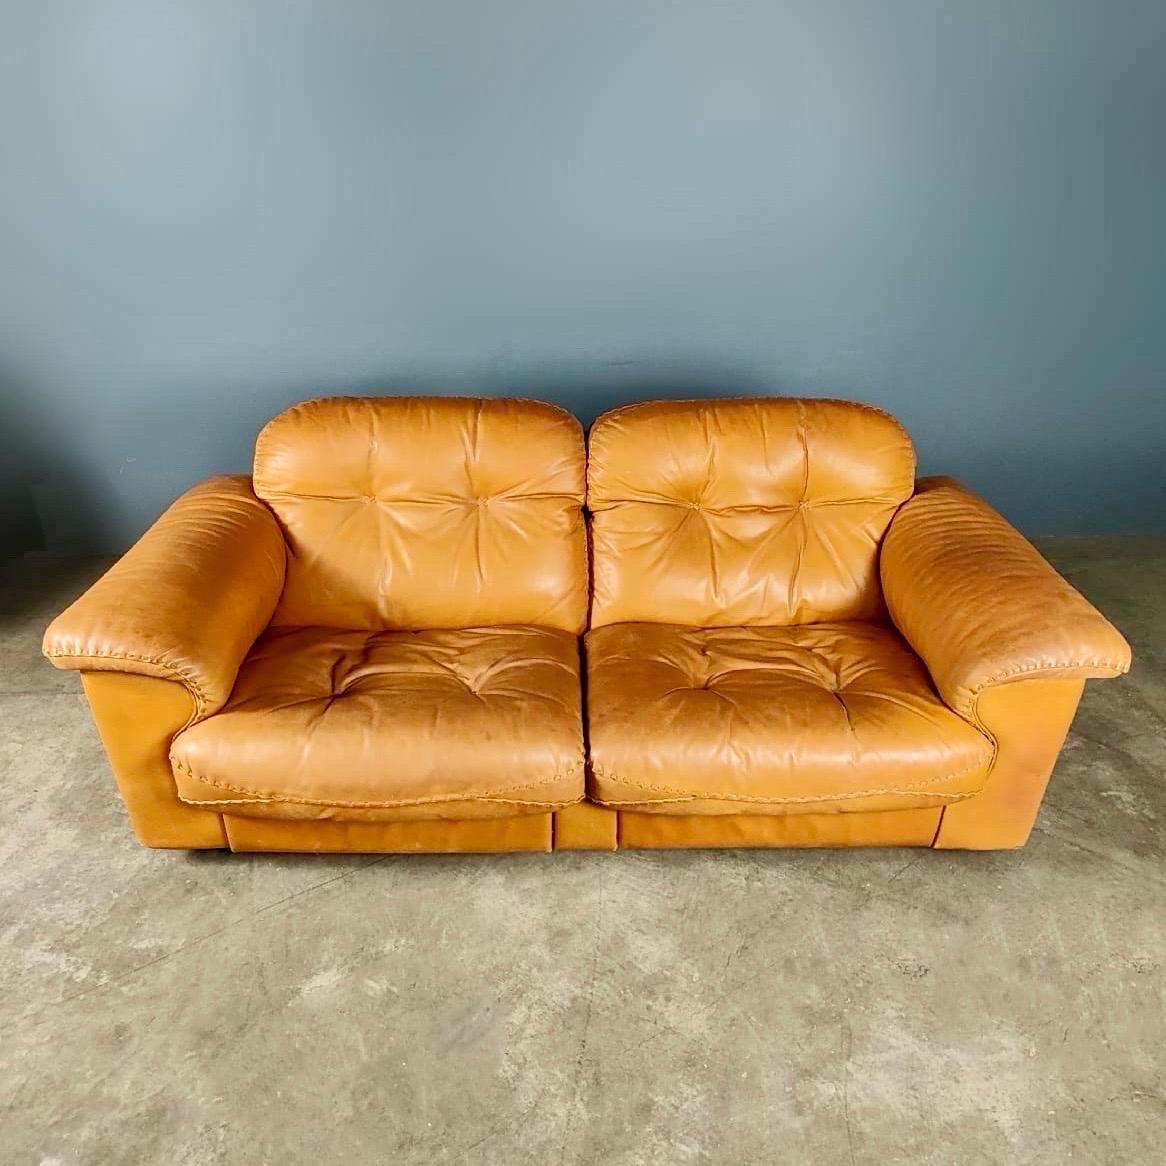 New Stock ✅

De Sede DS-101 Reclining Two Seater Tan Brown Leather Mid Century Vintage MCM

Leather luxury brand De Sede, made this adjustable and comfortable two-seater sofa in Switzerland during the 1960s

This luscious oversized sofa has